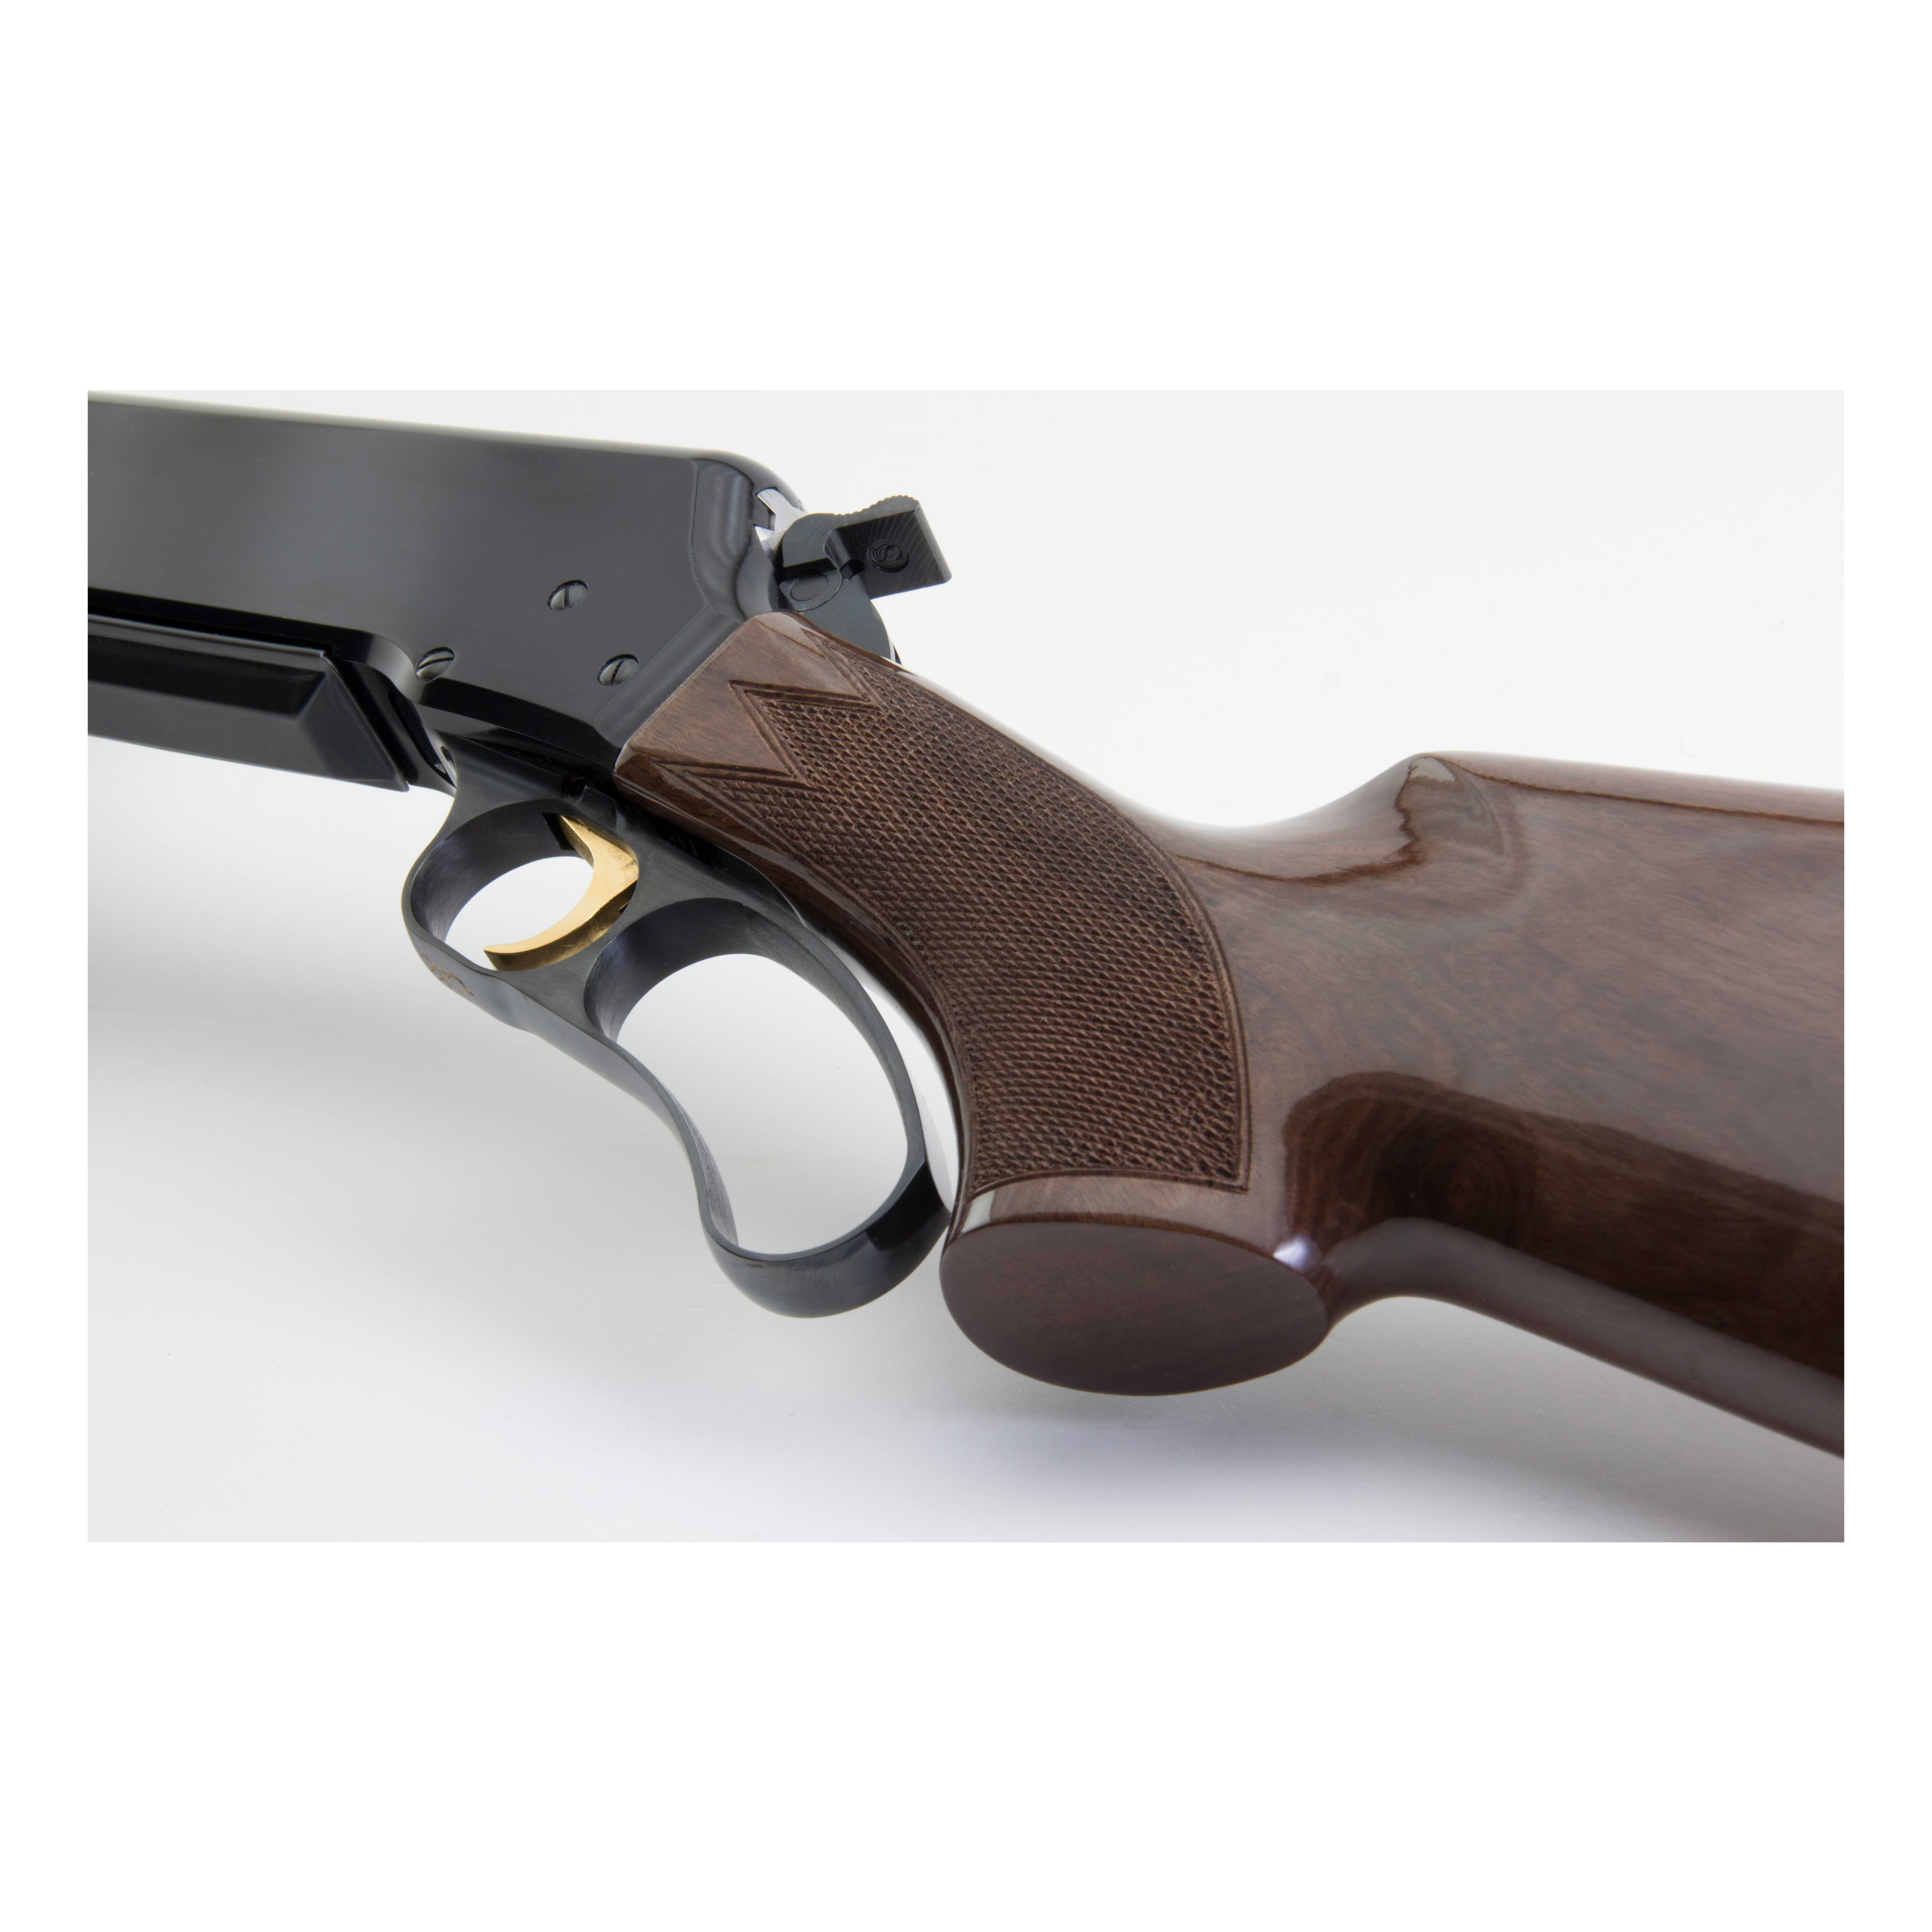 Browning® BLR Lightweight with Pistol Grip Lever-Action Rifle